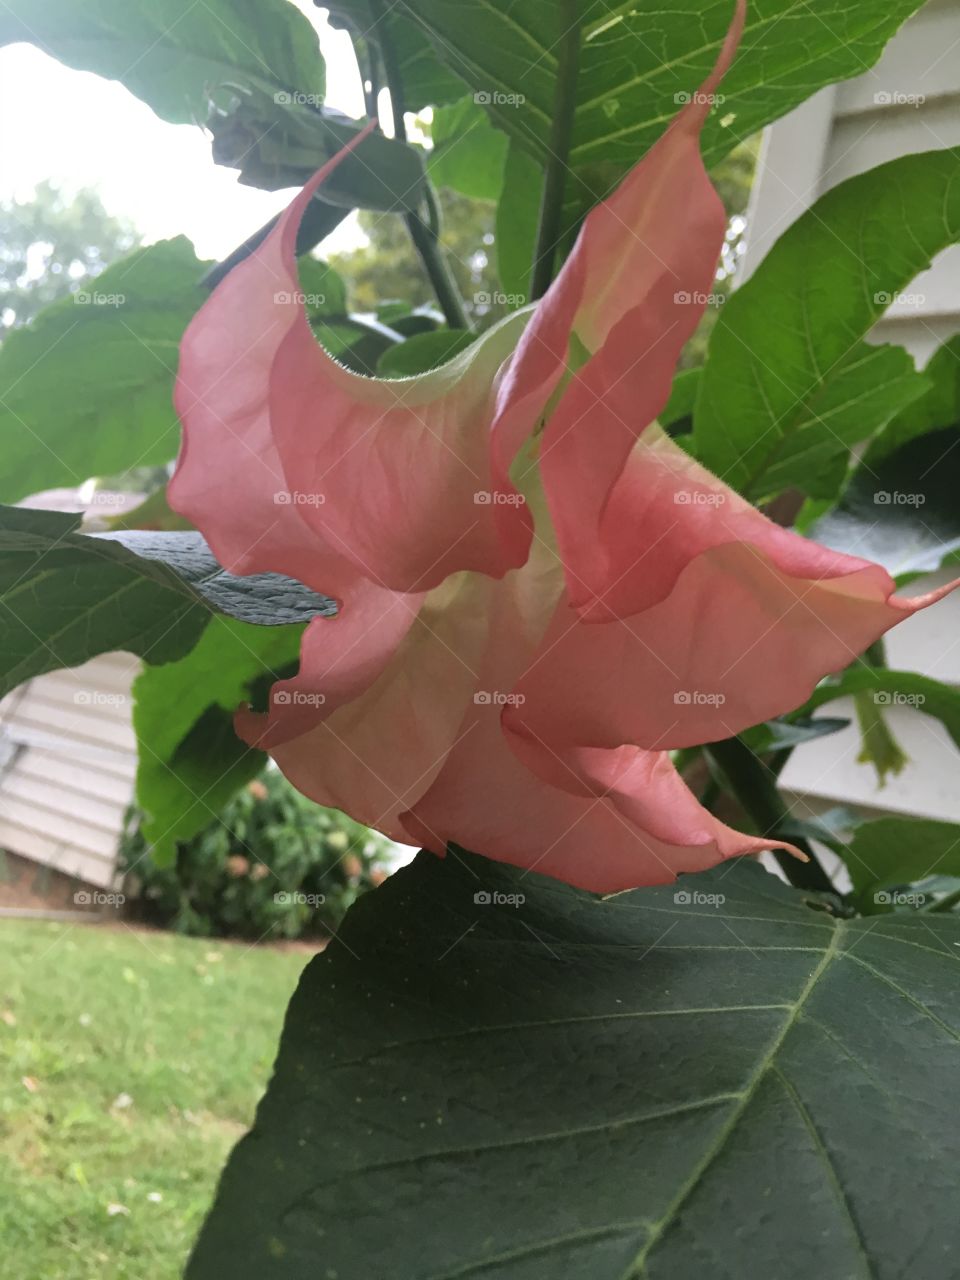 My very first angel trumpet that one of my sweet neighbors had given me some cuttings.